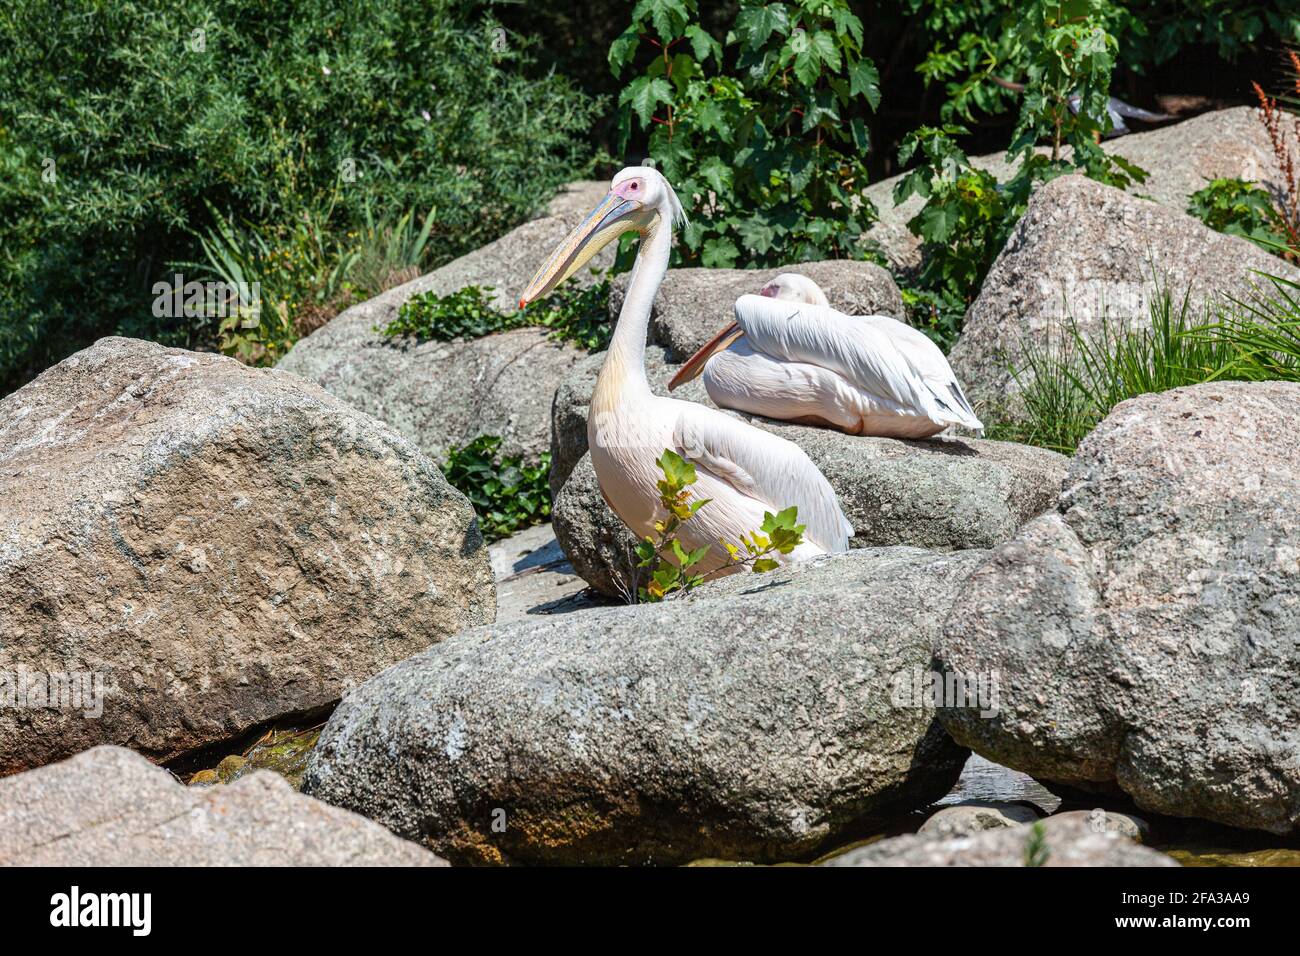 Pelicans dry their plumage in the sun. Lyon, France, Europe Stock Photo